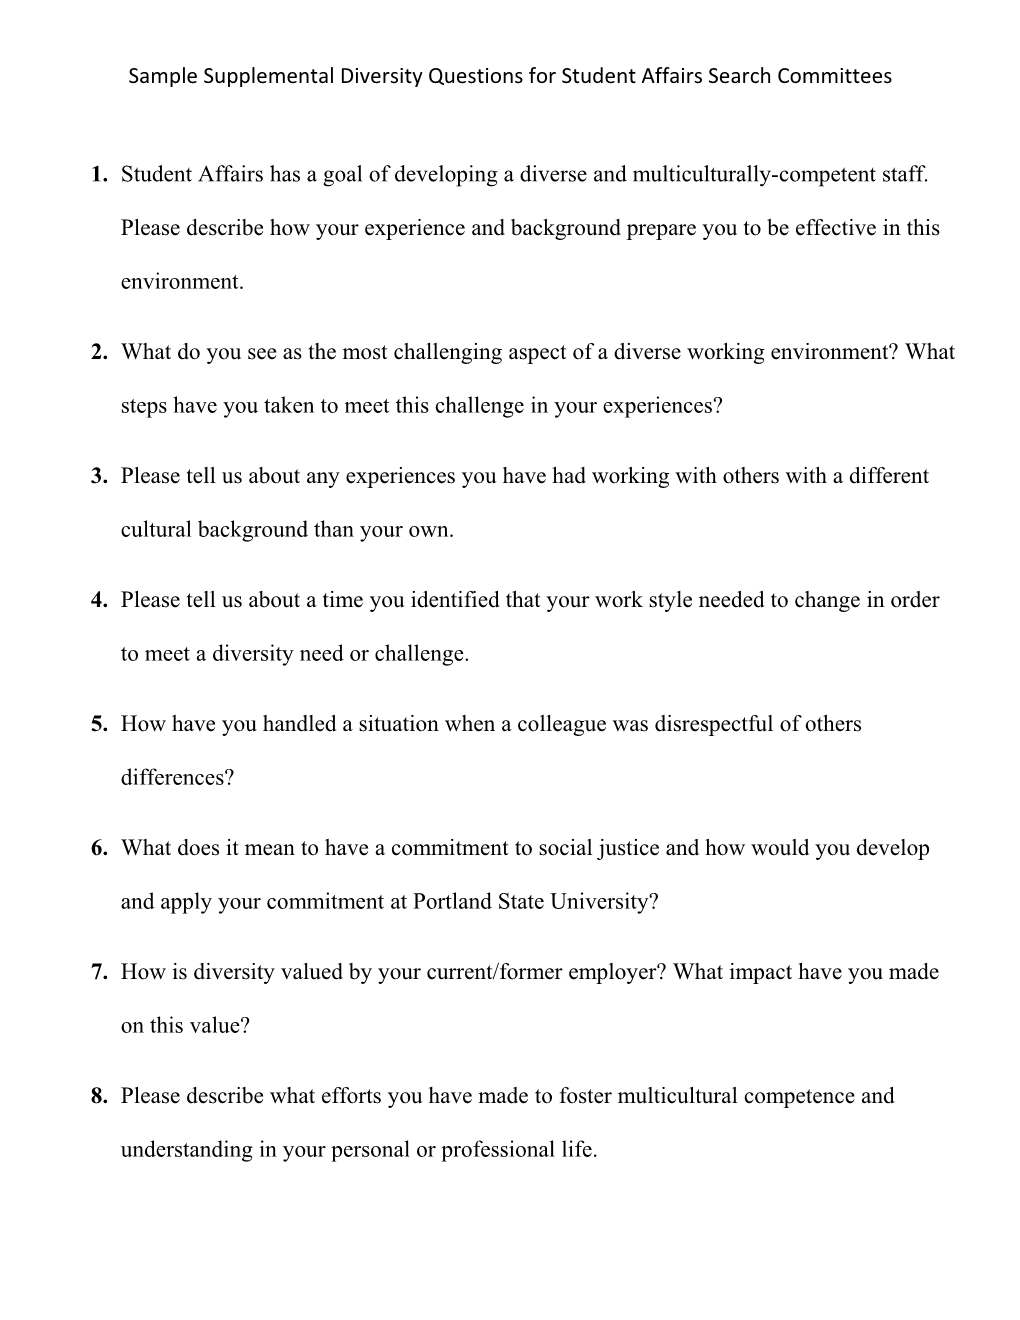 Sample Supplemental Diversity Questions for Student Affairs Search Committees